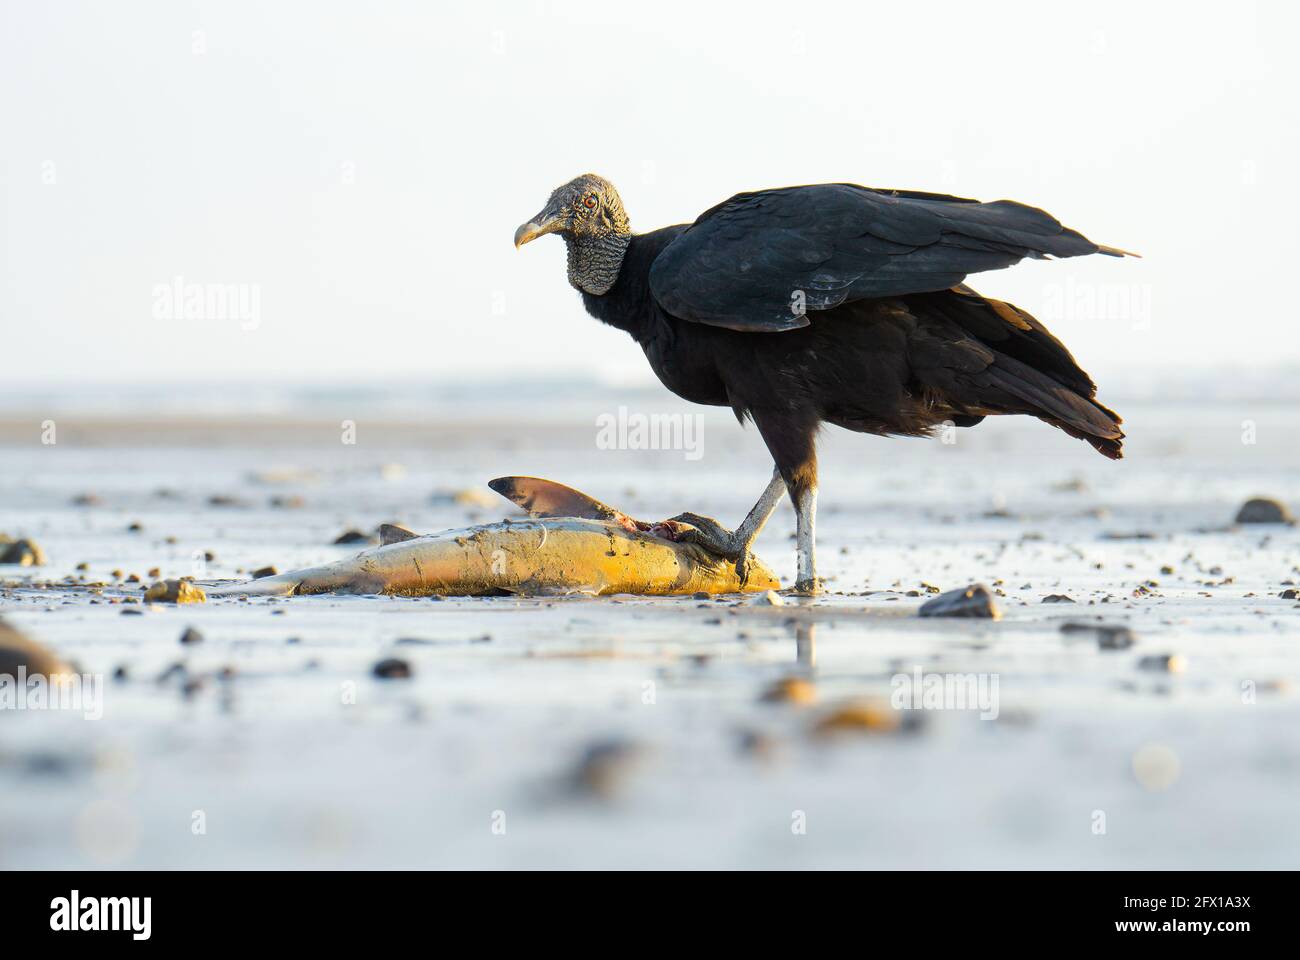 Portrait of a black vulture eating a baby shark washed ashore at sunset. Wildlife of Costa Rica. Stock Photo